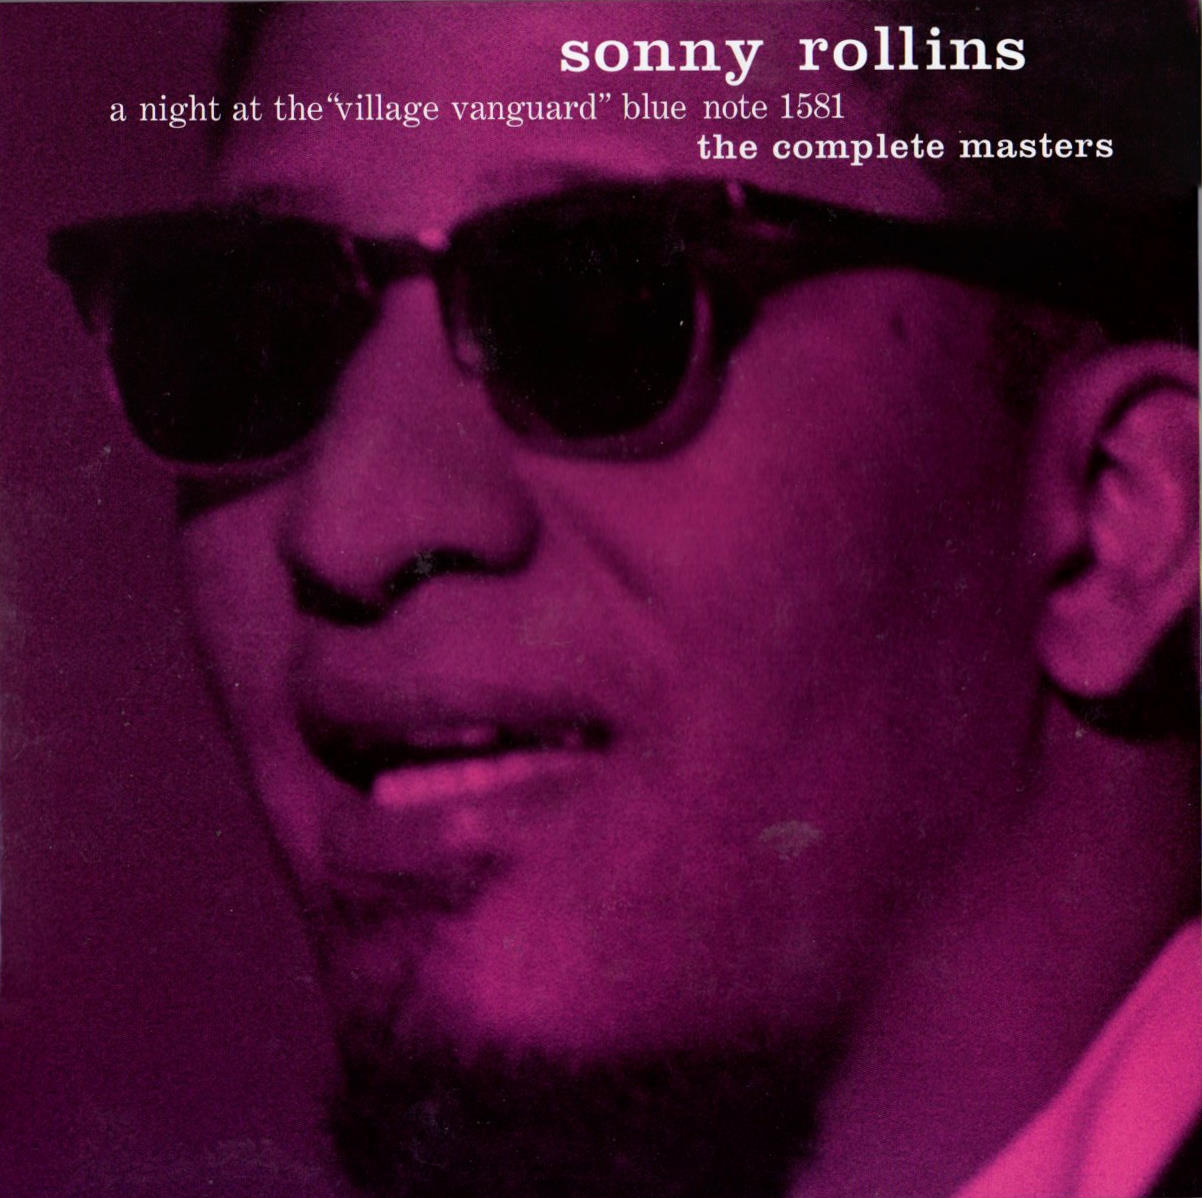 Sonny Rolling a night at the "village vanguard"